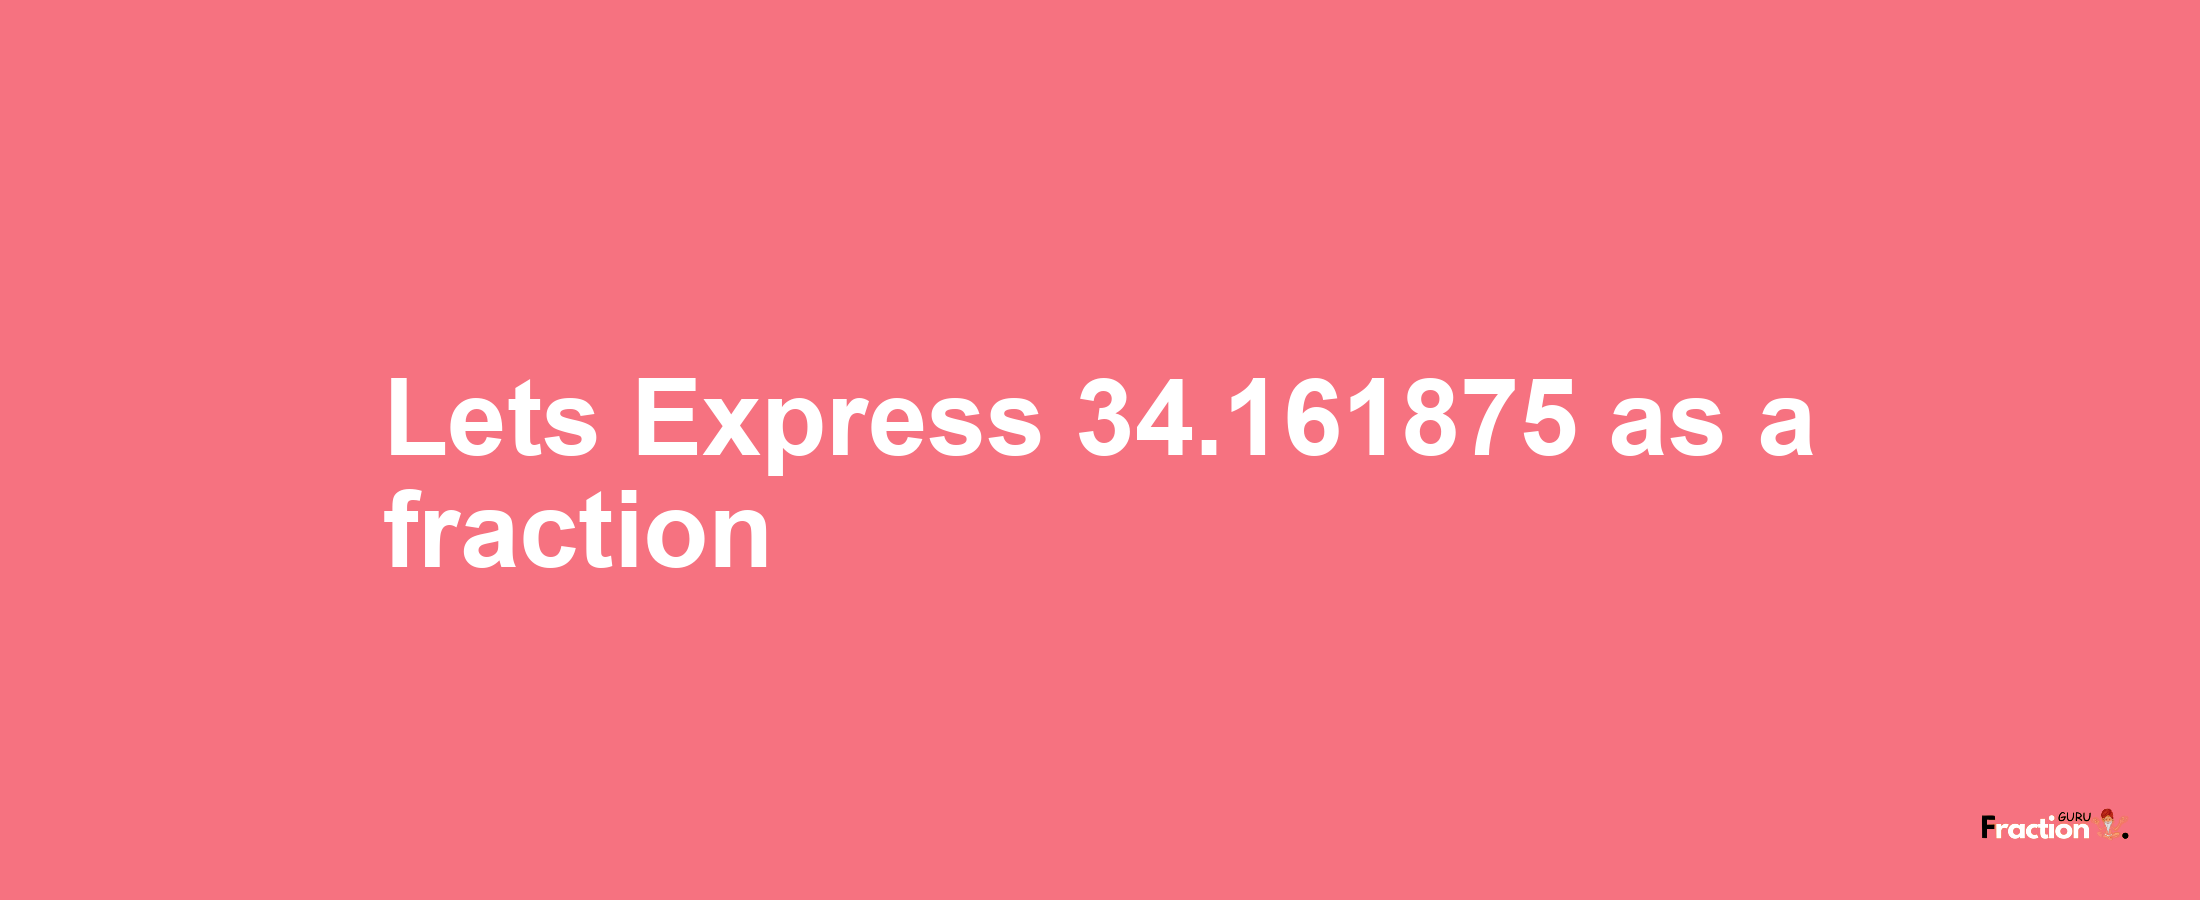 Lets Express 34.161875 as afraction